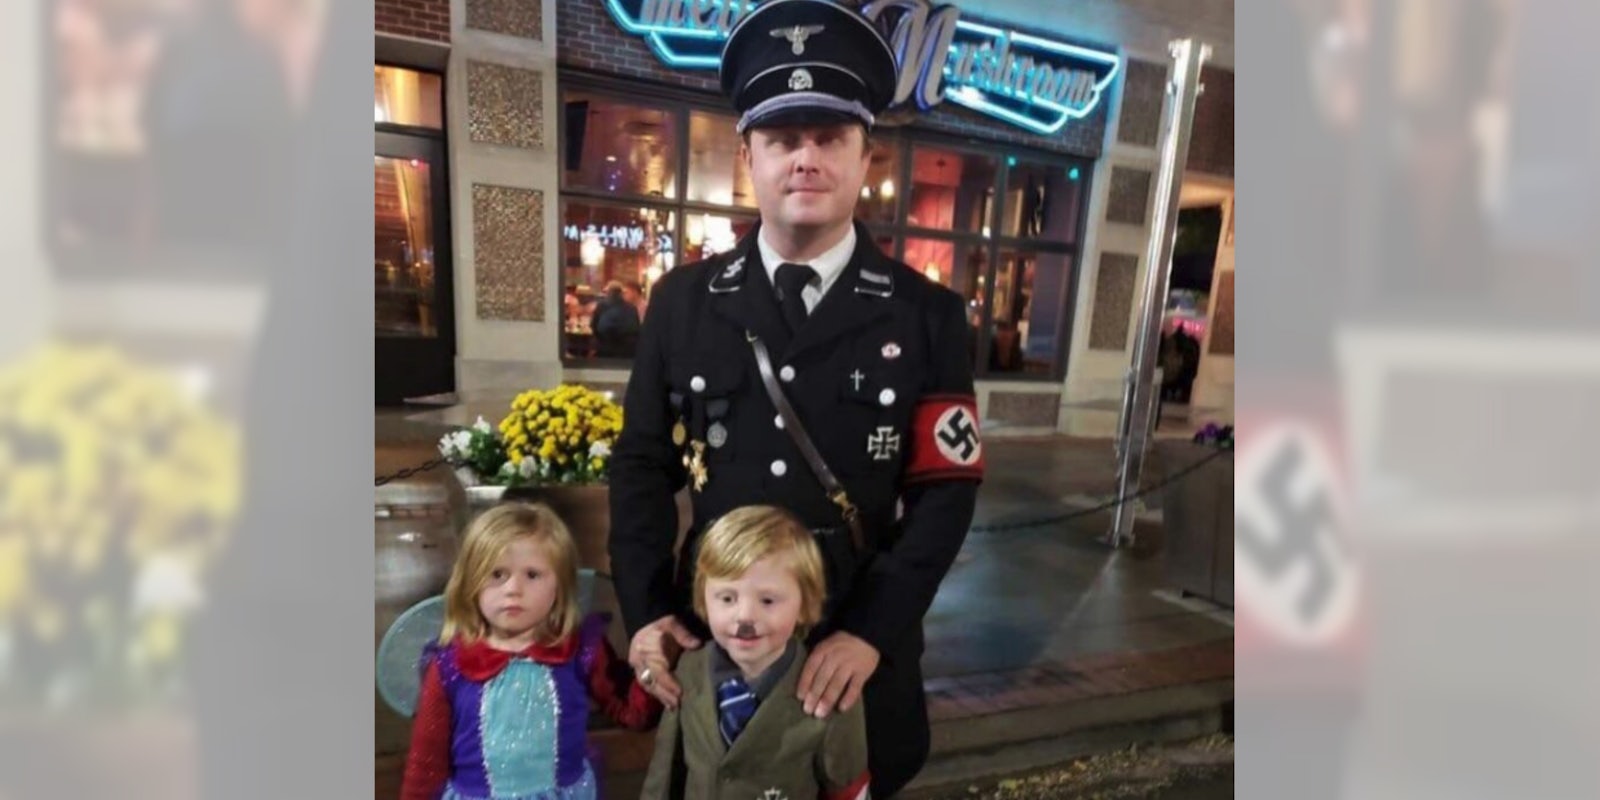 A man was criticized for his and his son's Nazi-themed Halloween costumes.